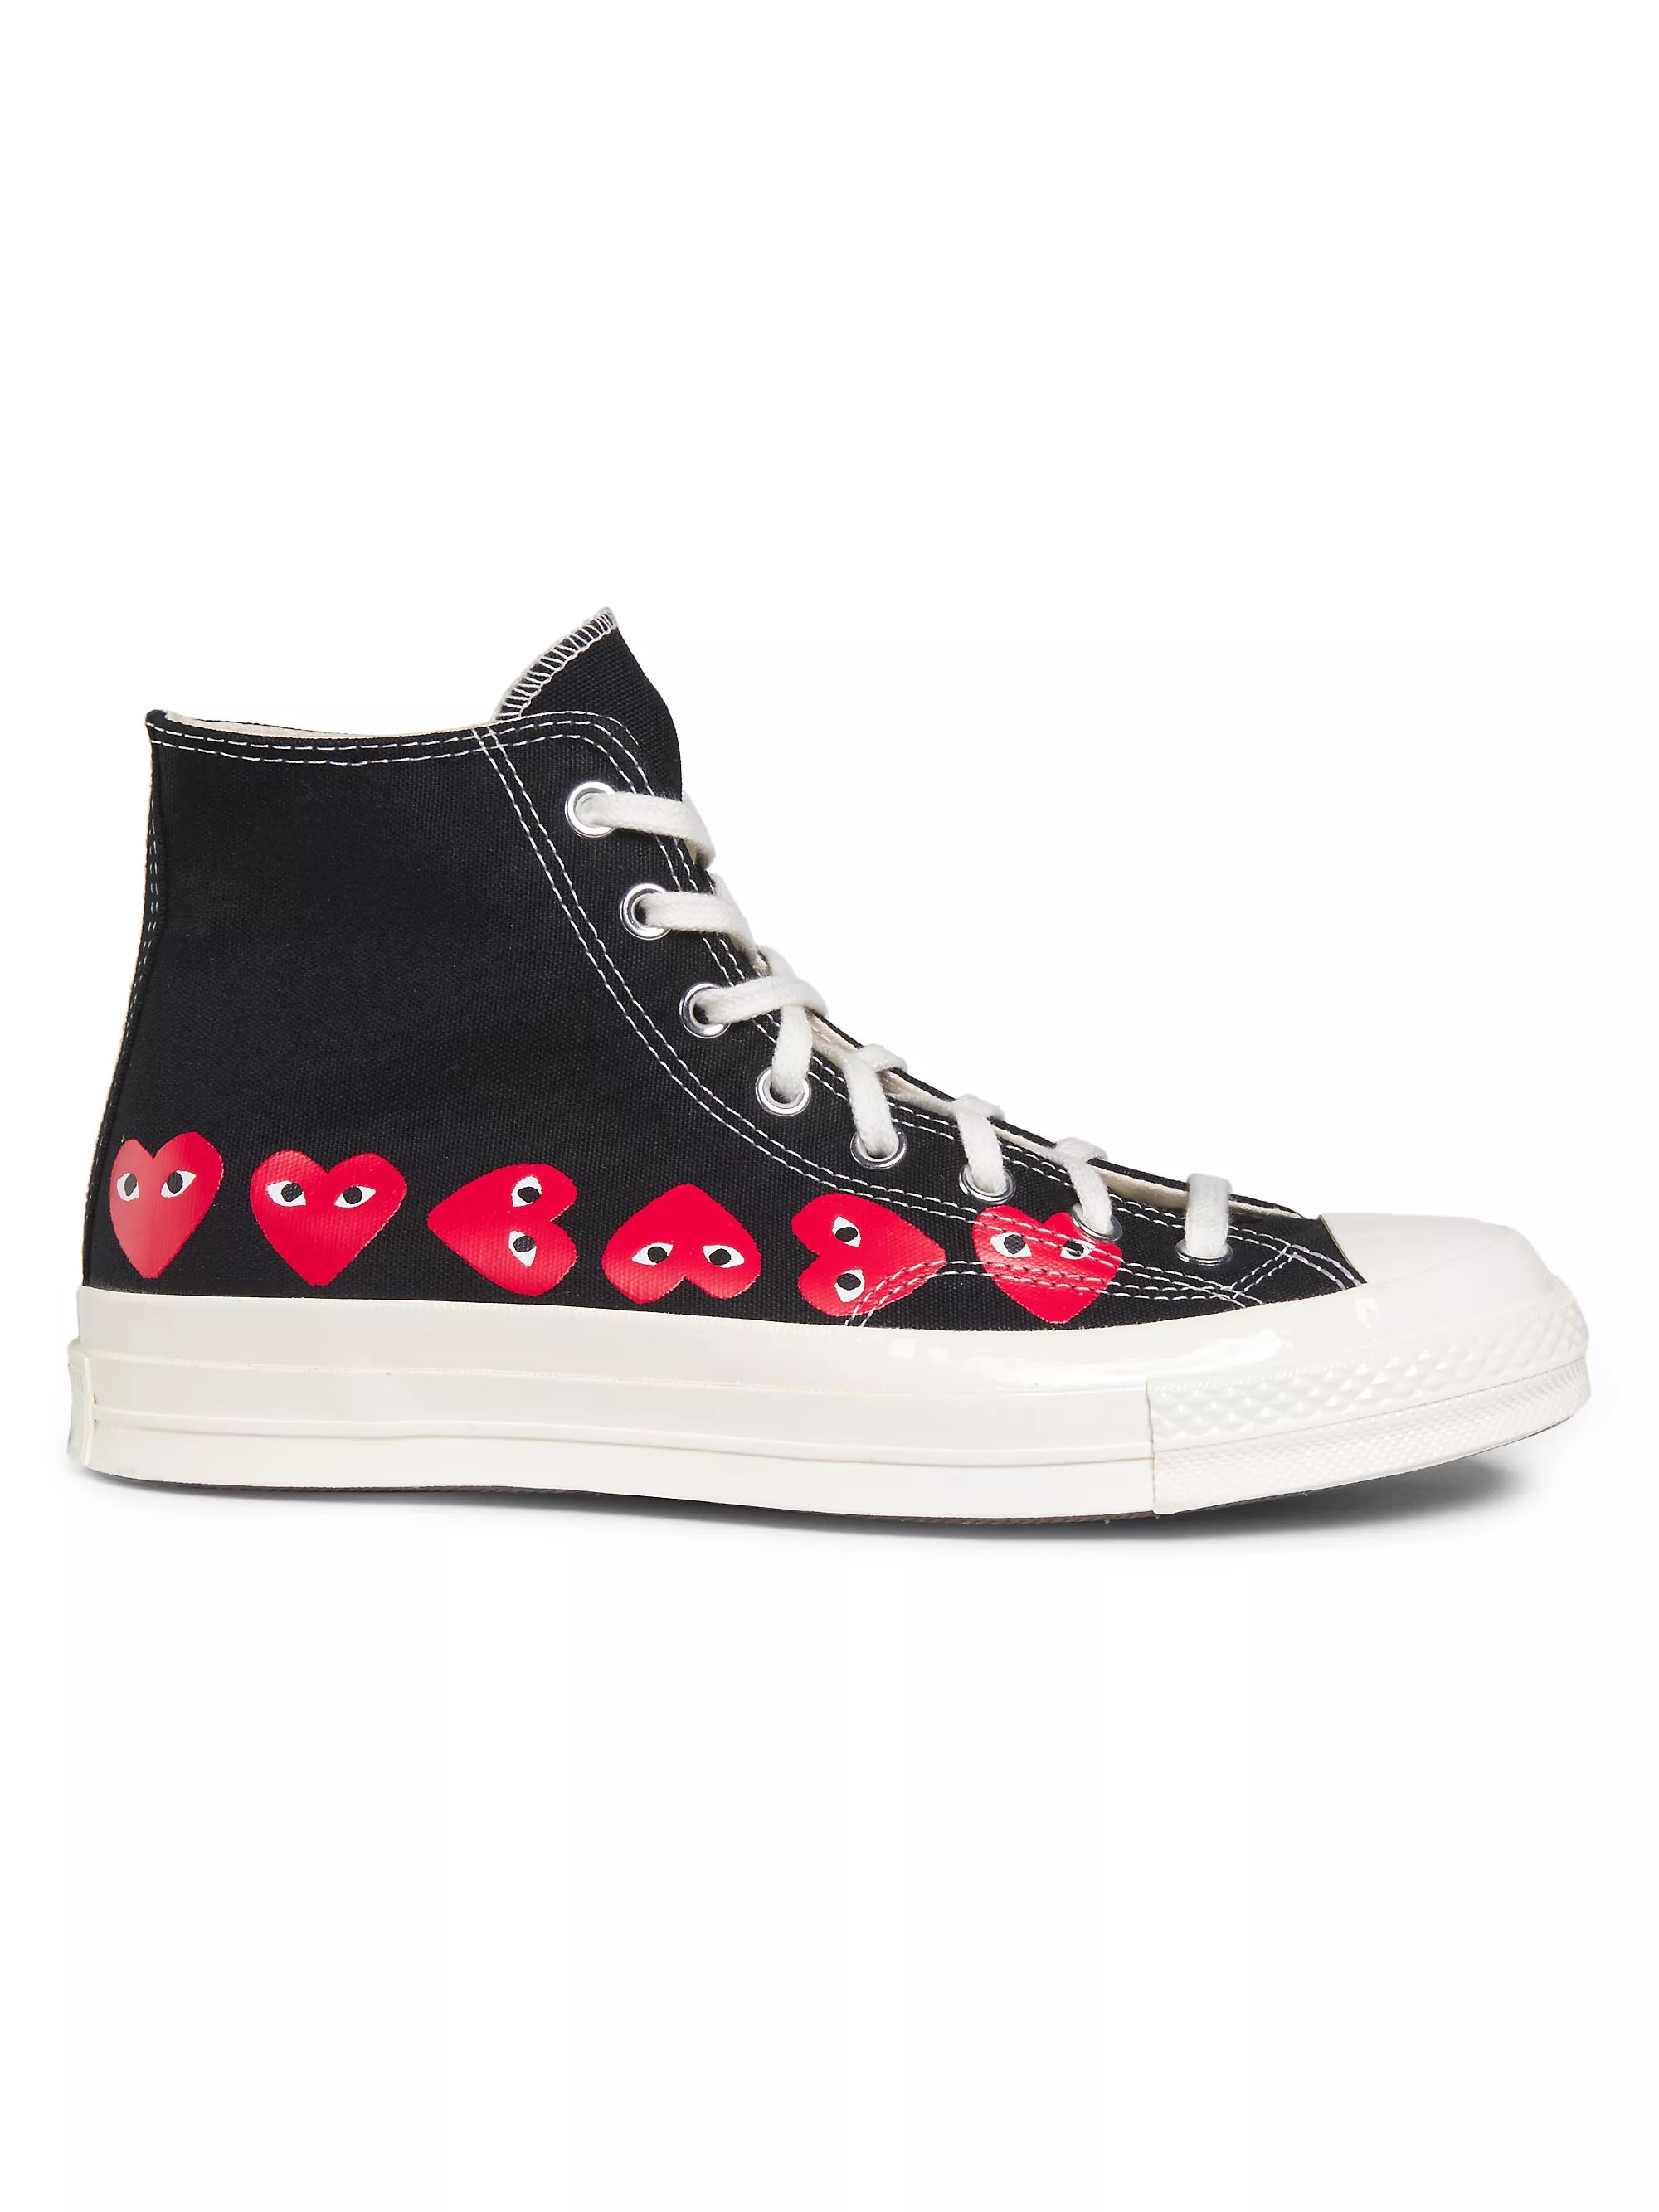 CdG PLAY x Converse Chuck Taylor All Star Multi-Heart High-Top Sneakers | Saks Fifth Avenue